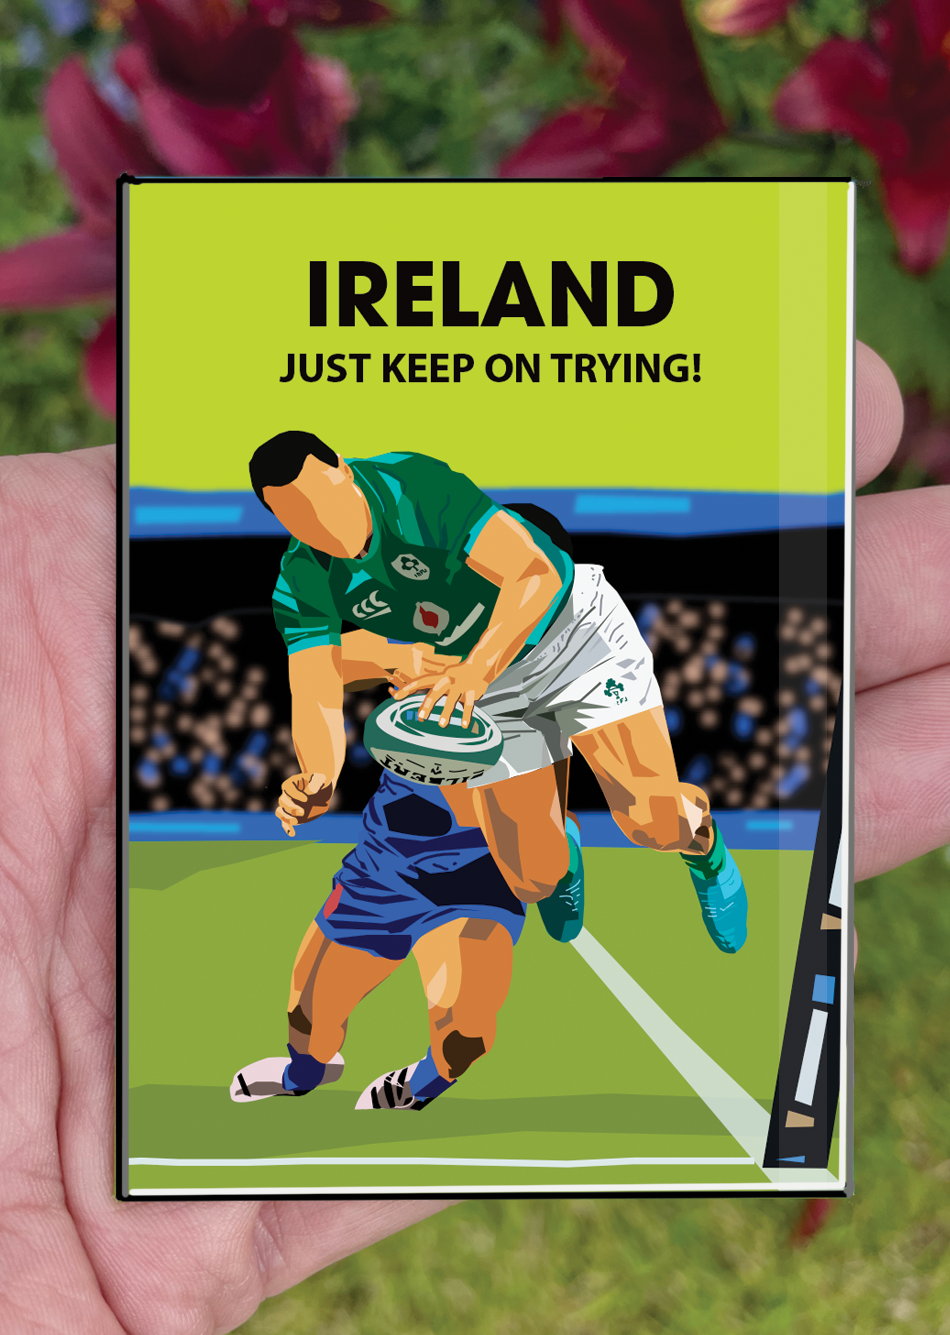 Ireland Postcard or A4 Mounted Print or Fridge Magnet - Keep on Trying